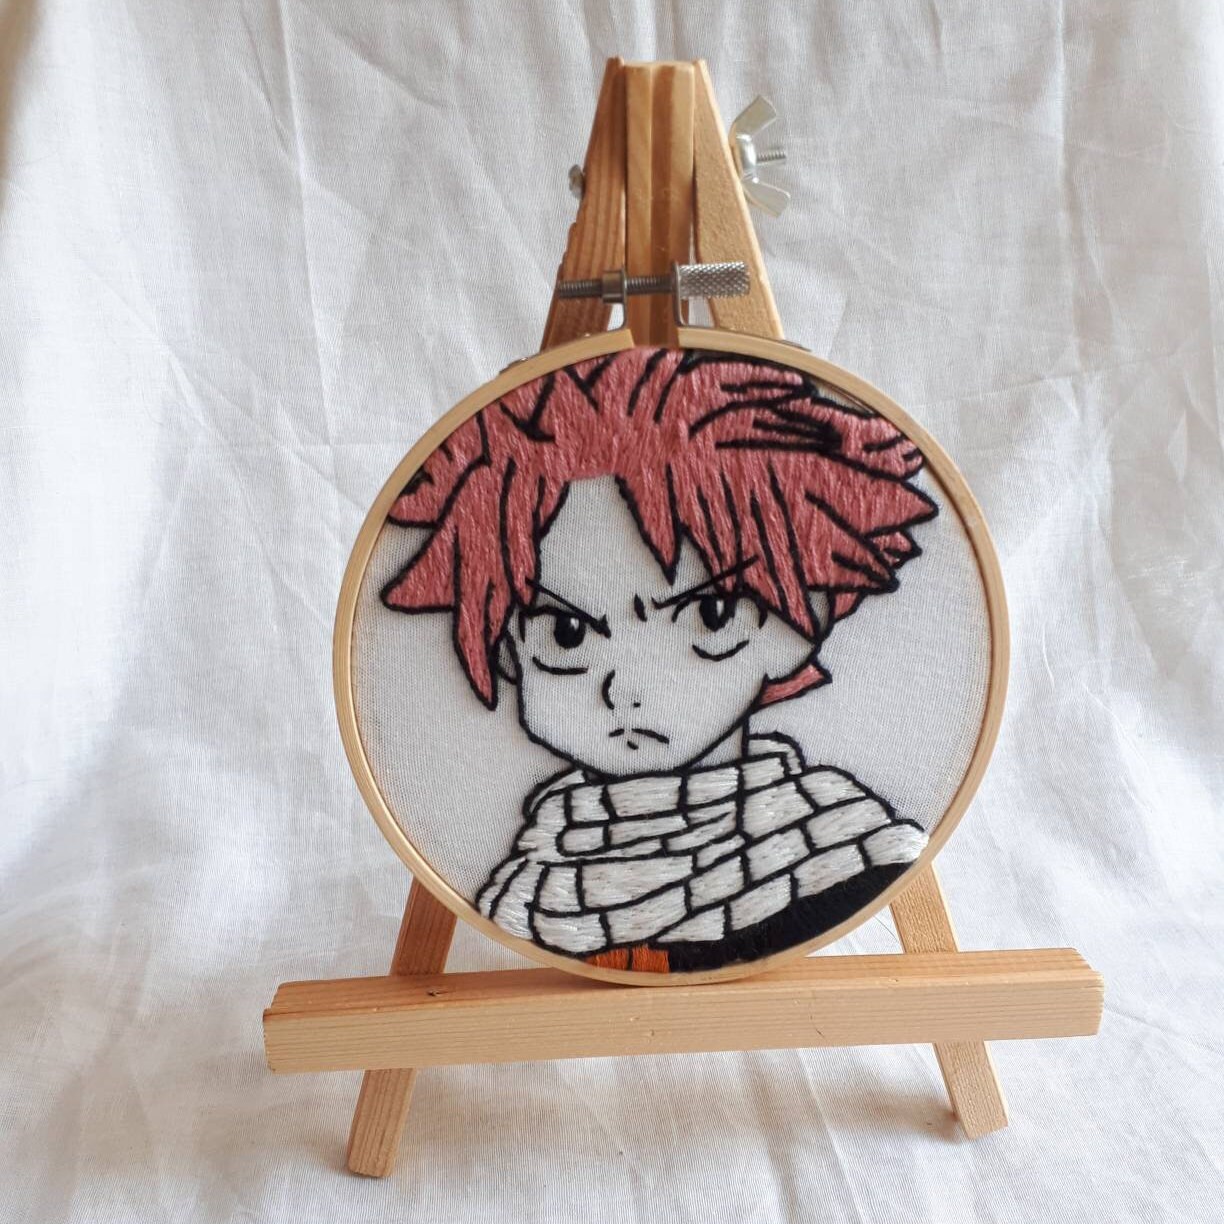 Natsu Fairy Tail Anime Love You To The Moon And Back Galaxy 2023 Holiday  Couple Gifts Christmas Decorations Ornament - Mugteeco